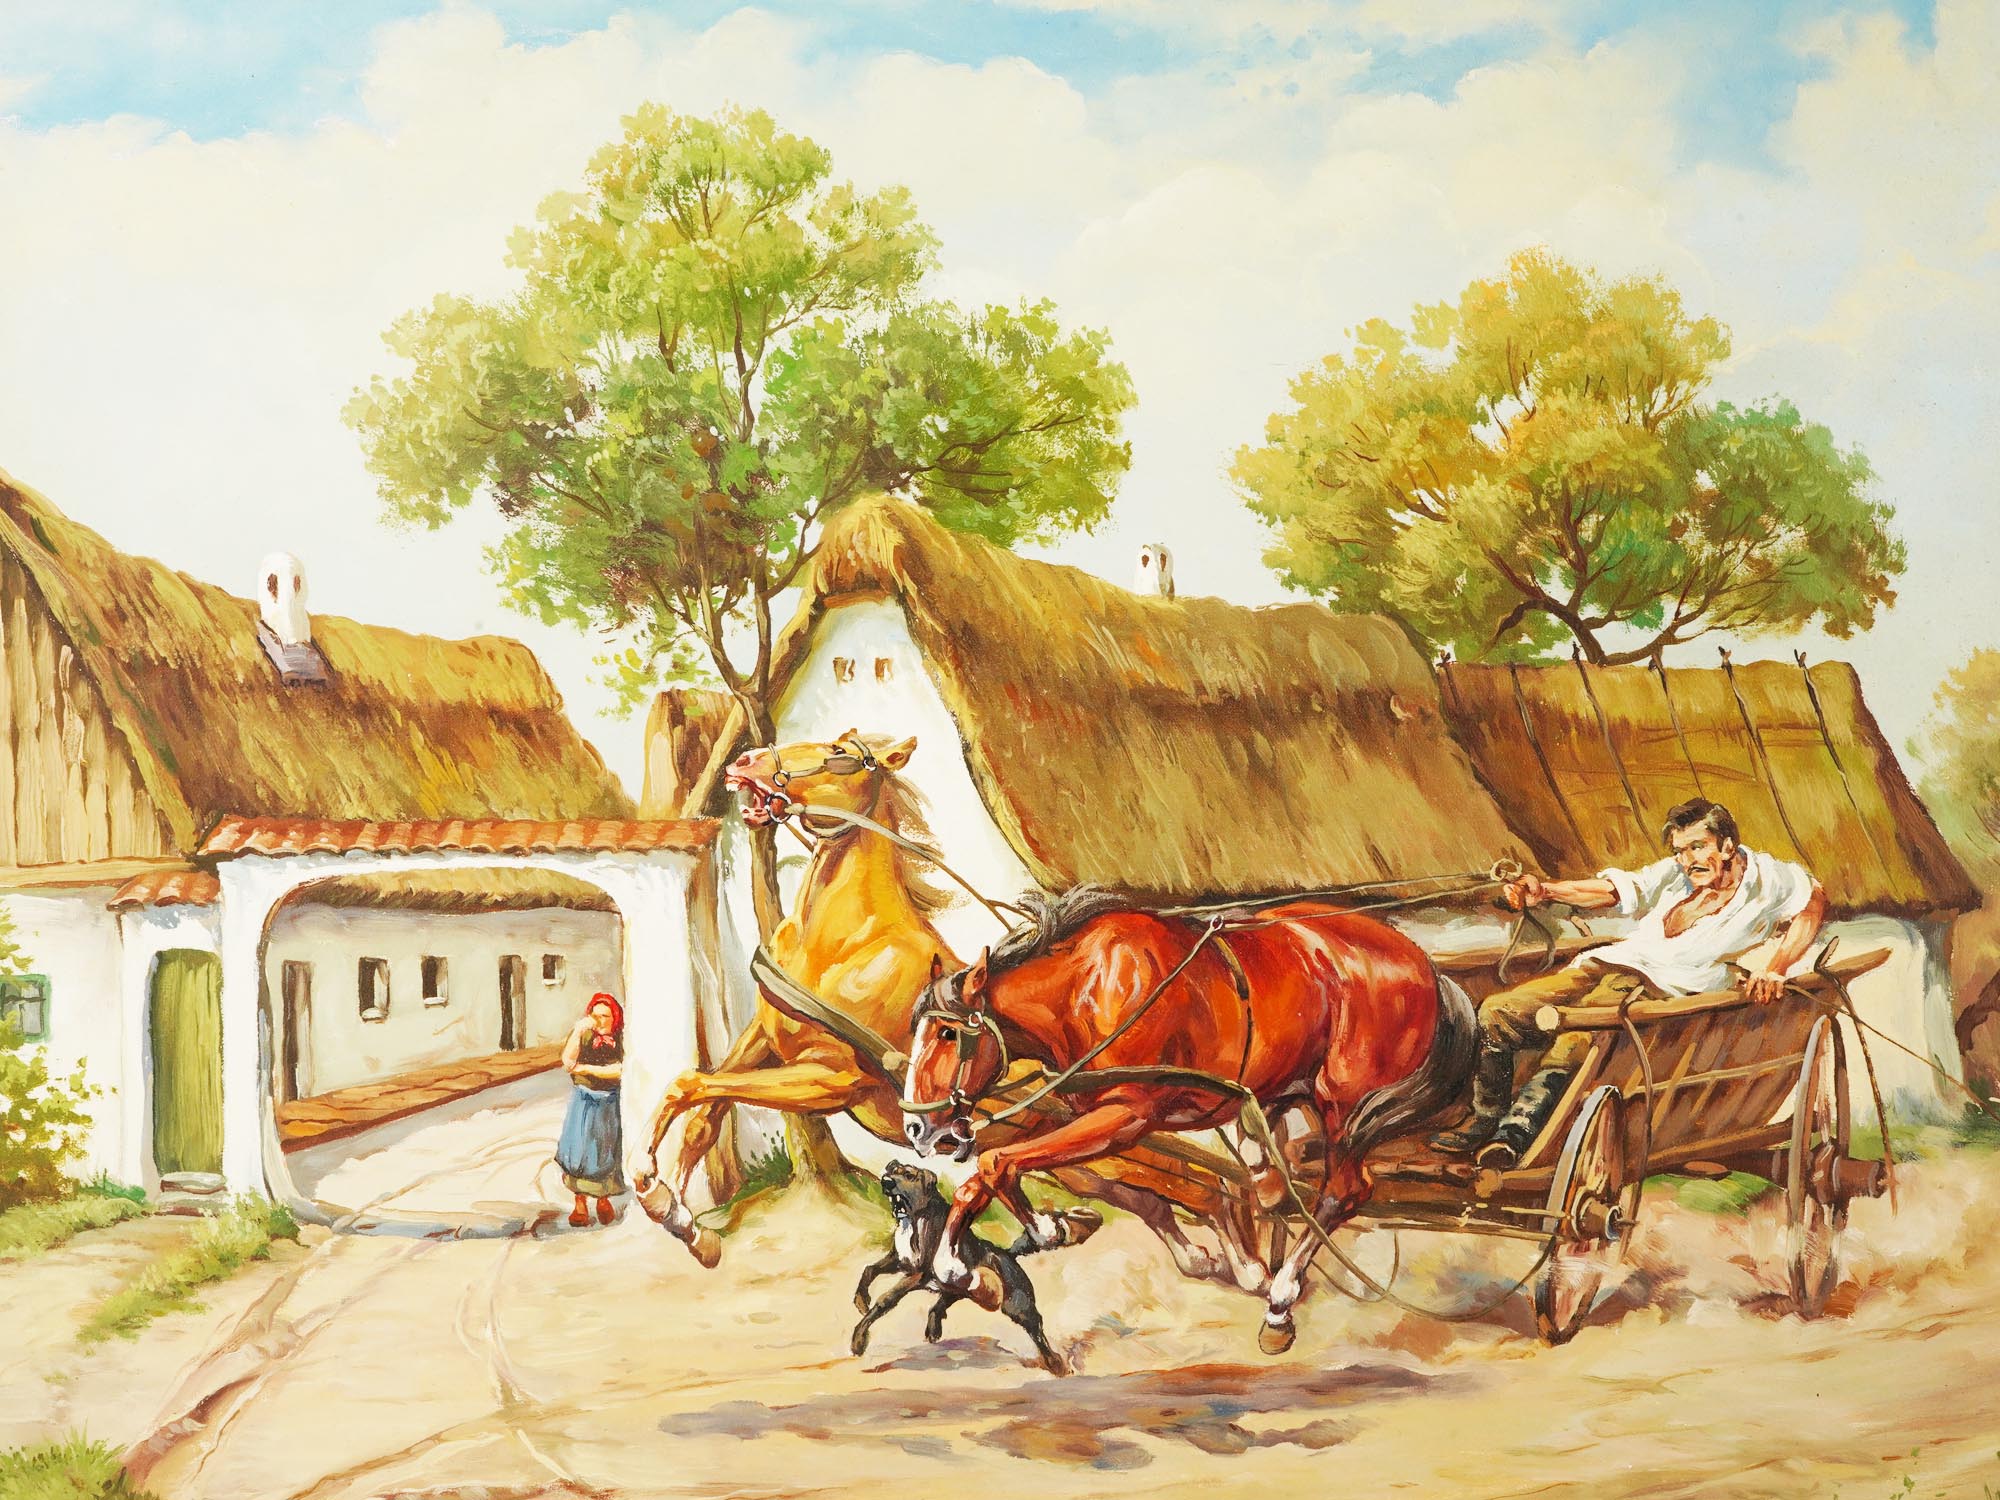 HUNGARIAN RURAL SCENE HORSE PAINTING BY ELEMER KOVACS PIC-1